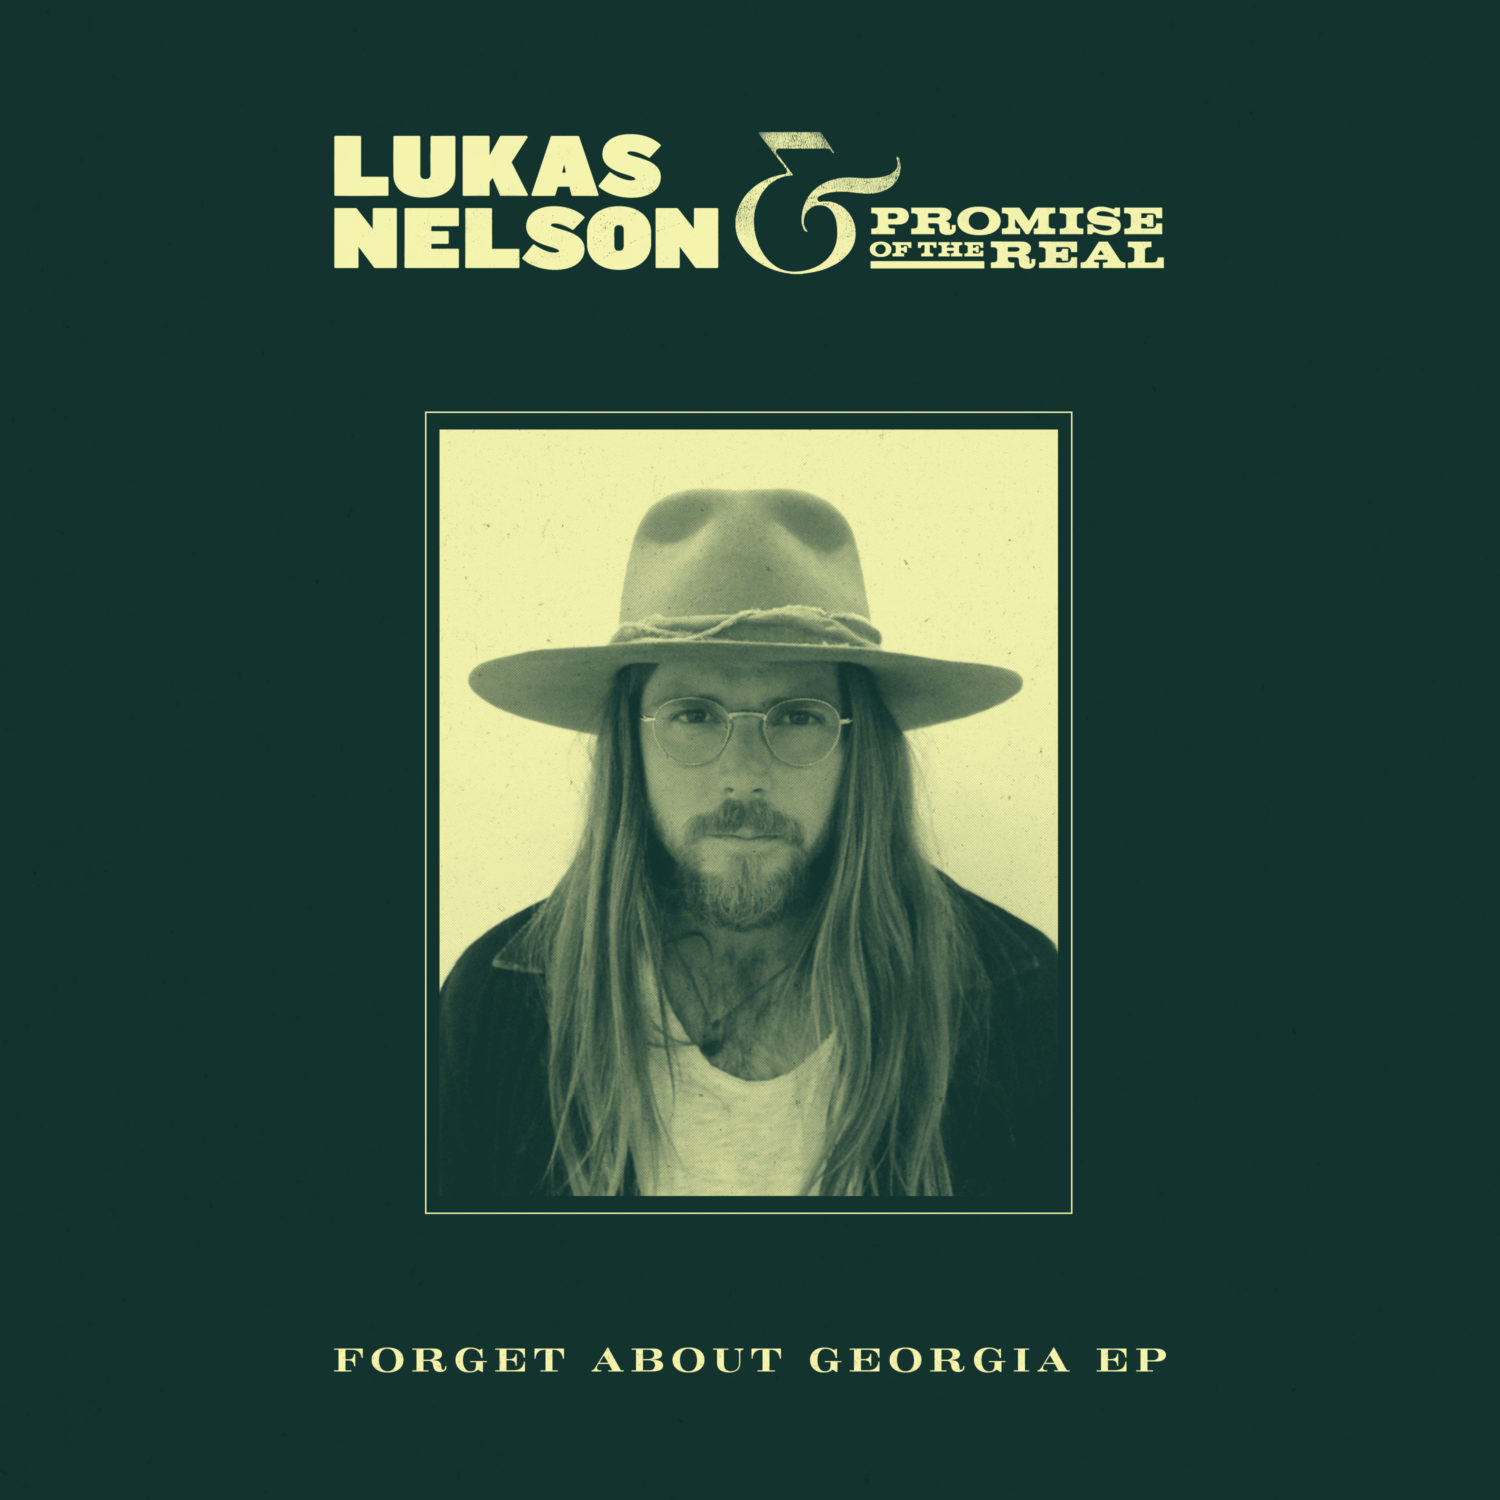 Lukas Nelson & Promise Of The Real - Forget About Georgia EP